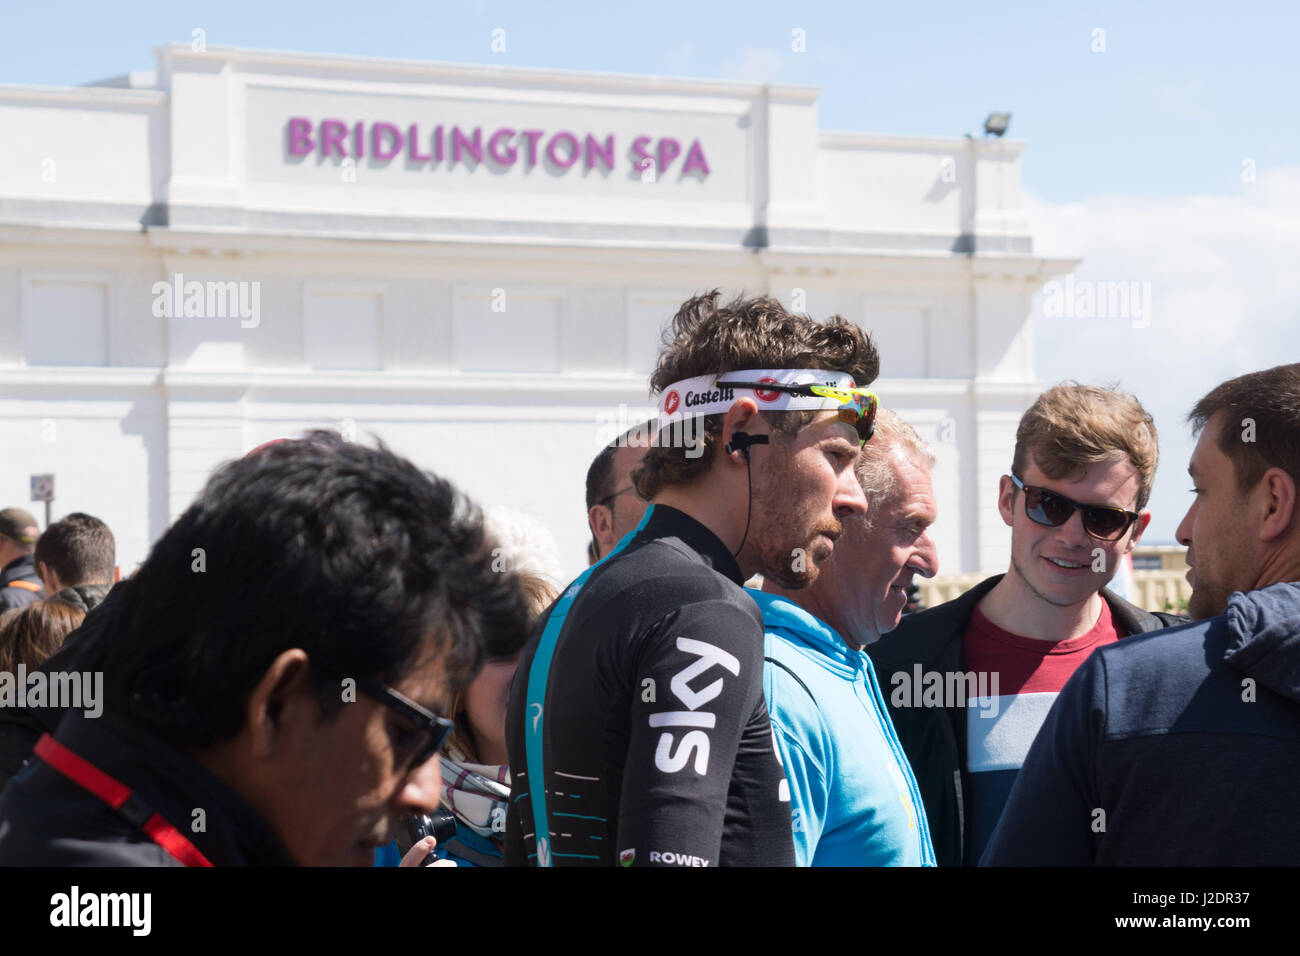 Bridlington, UK. 28th Apr, 2017. In front of the Bridlington Spa, Team Sky rider chats to the public. Dibben Credit: Richard Smith/Alamy Live News Stock Photo